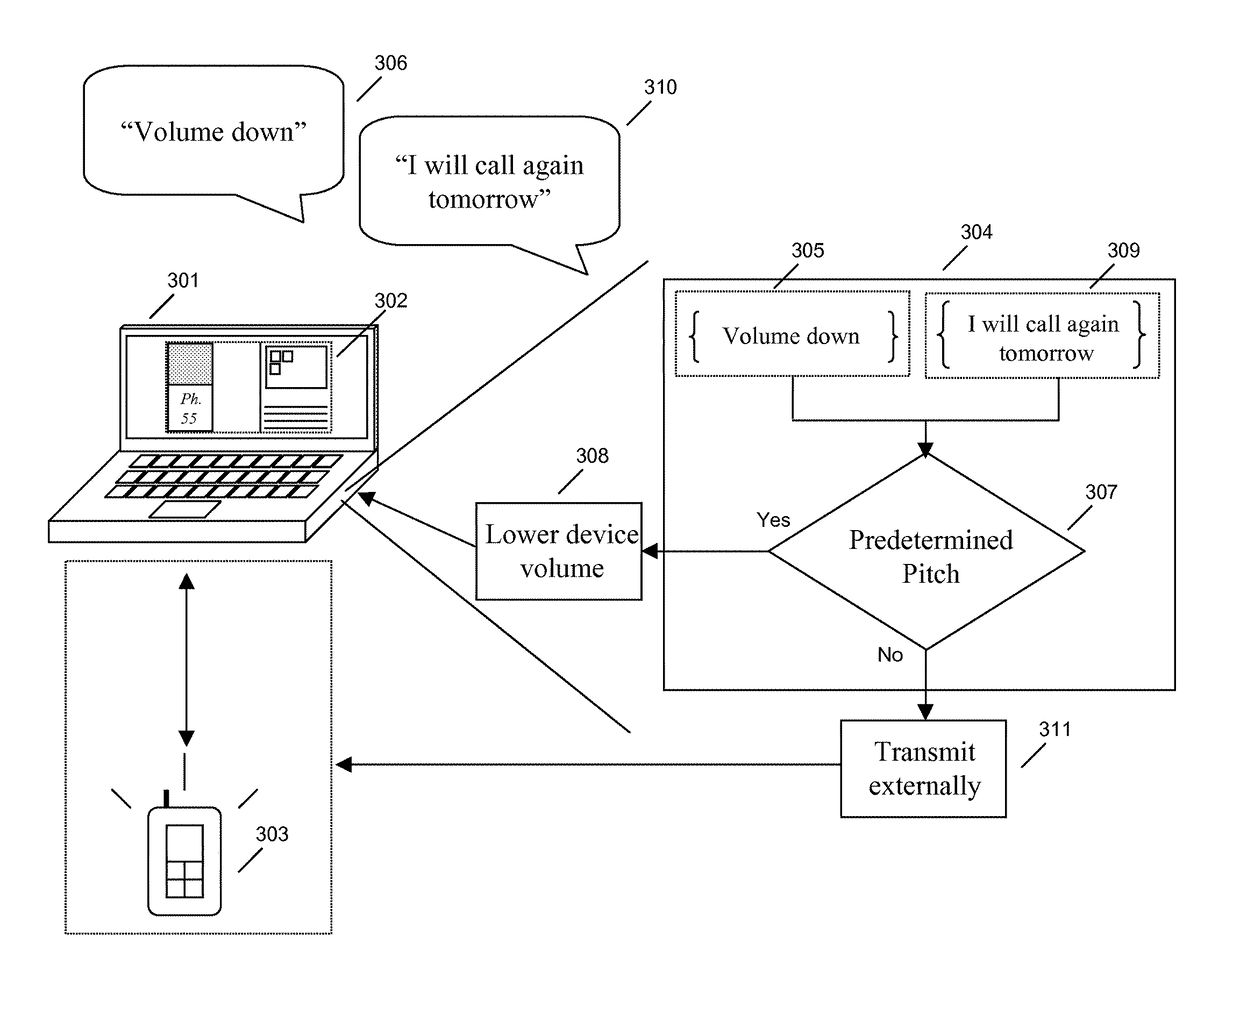 Selective transmission of voice data